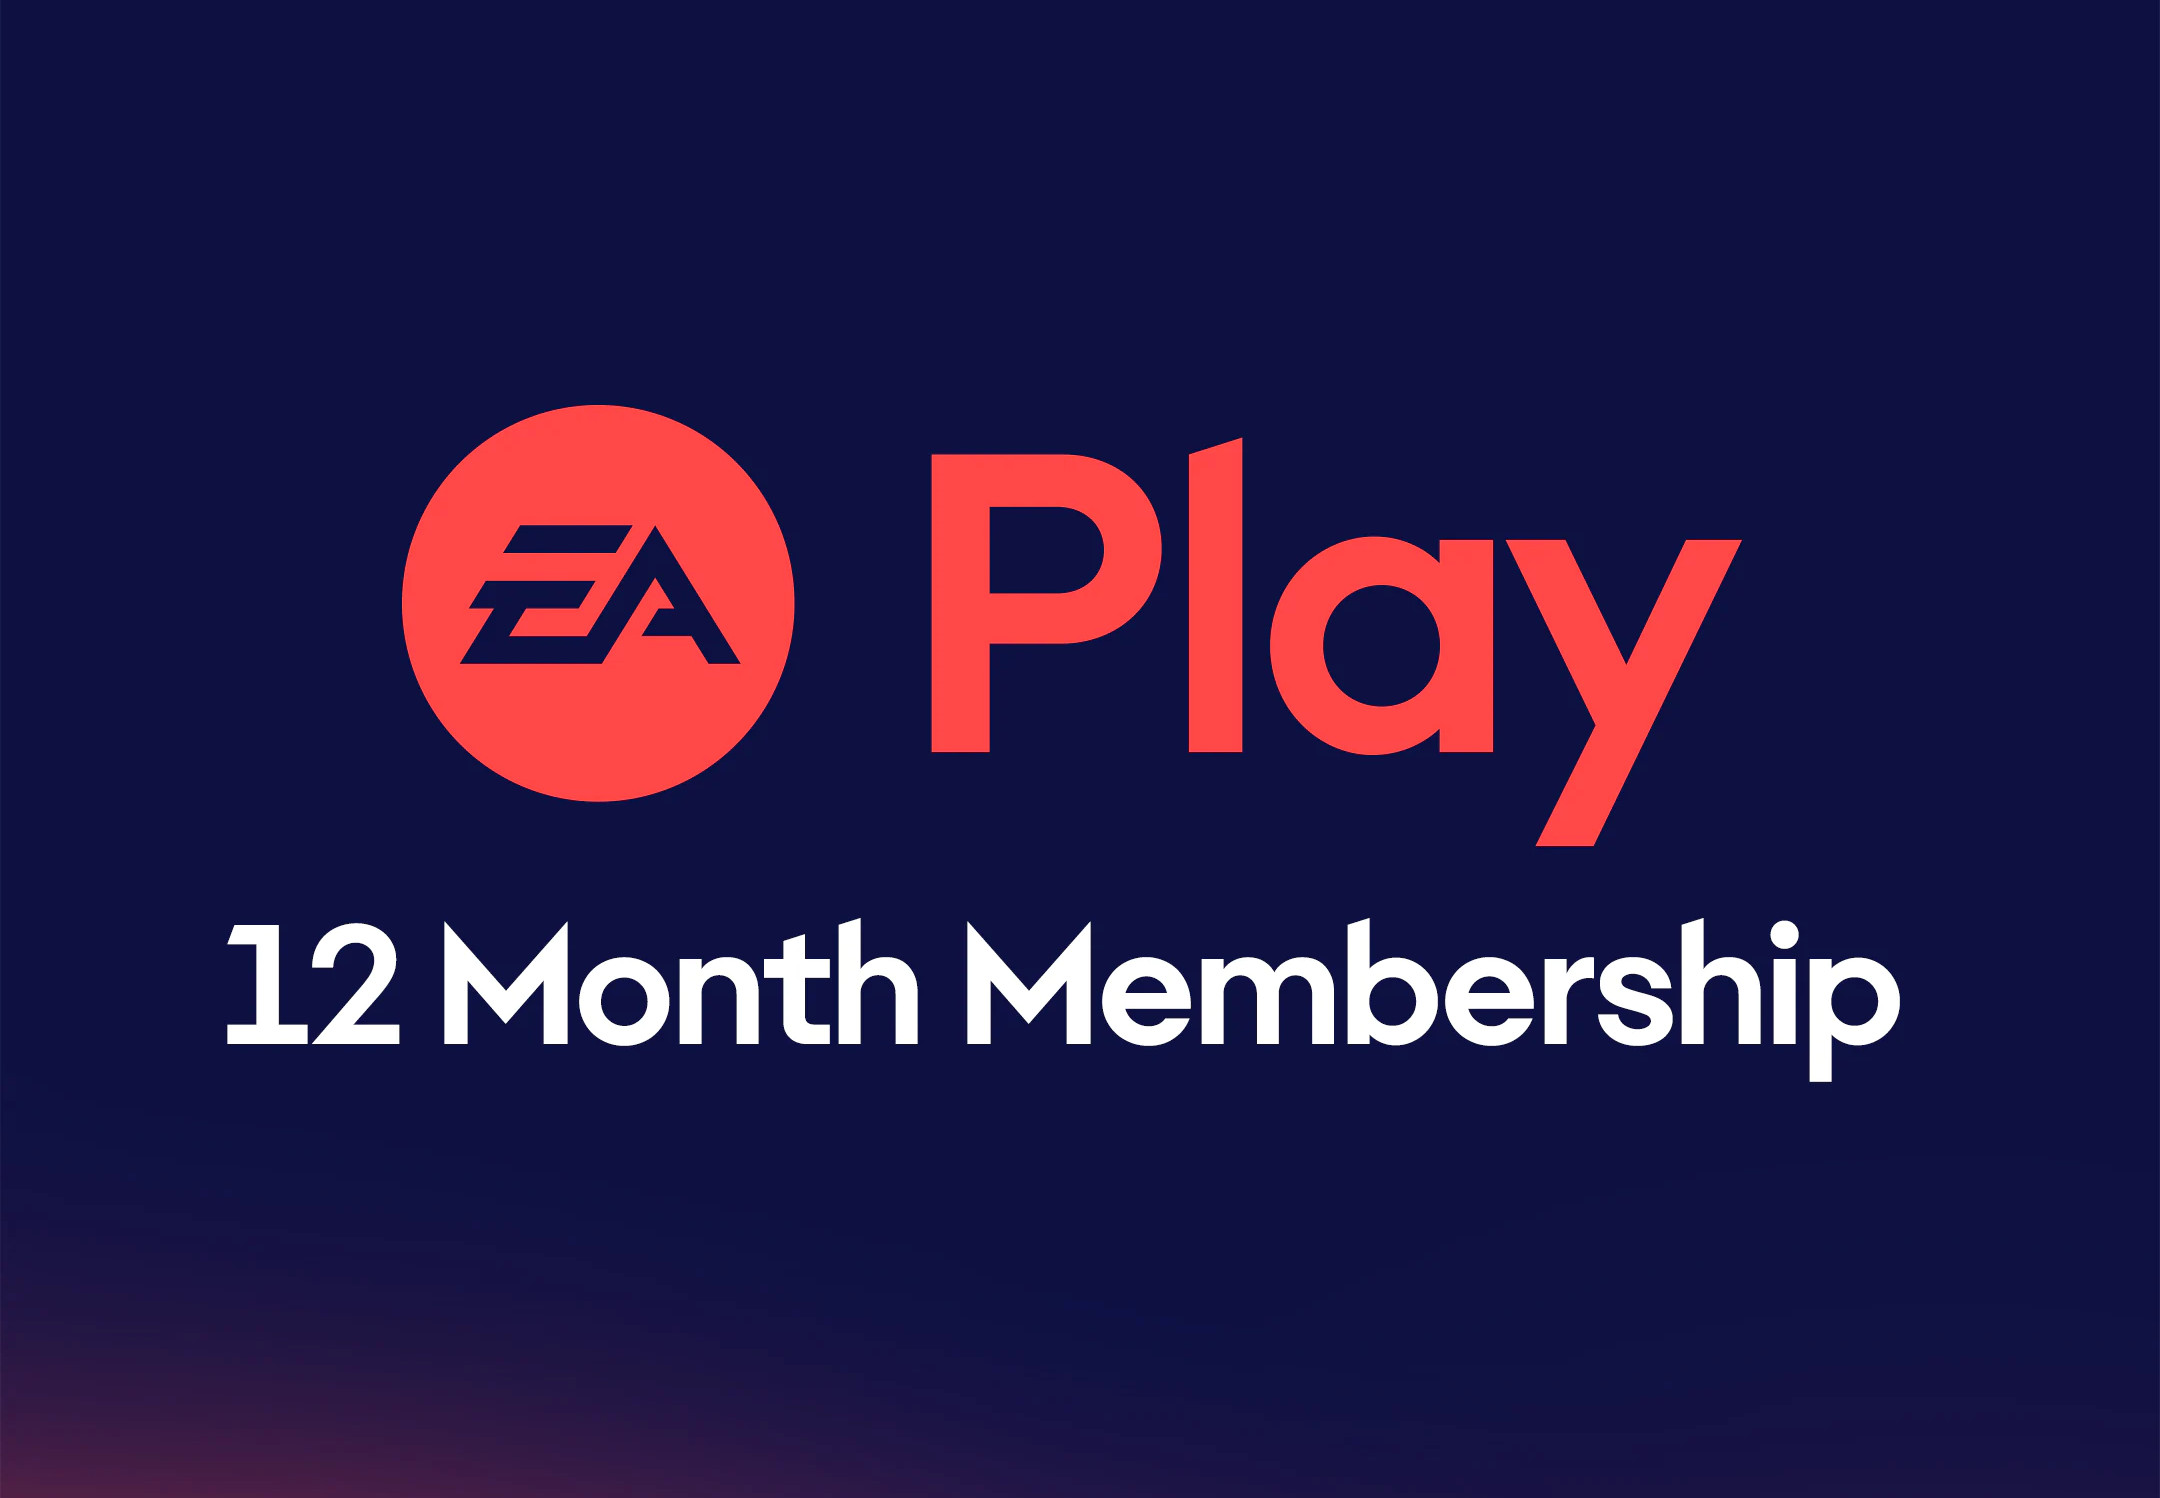 EA Play - 12 Months Subscription PlayStation 4/5 ACCOUNT